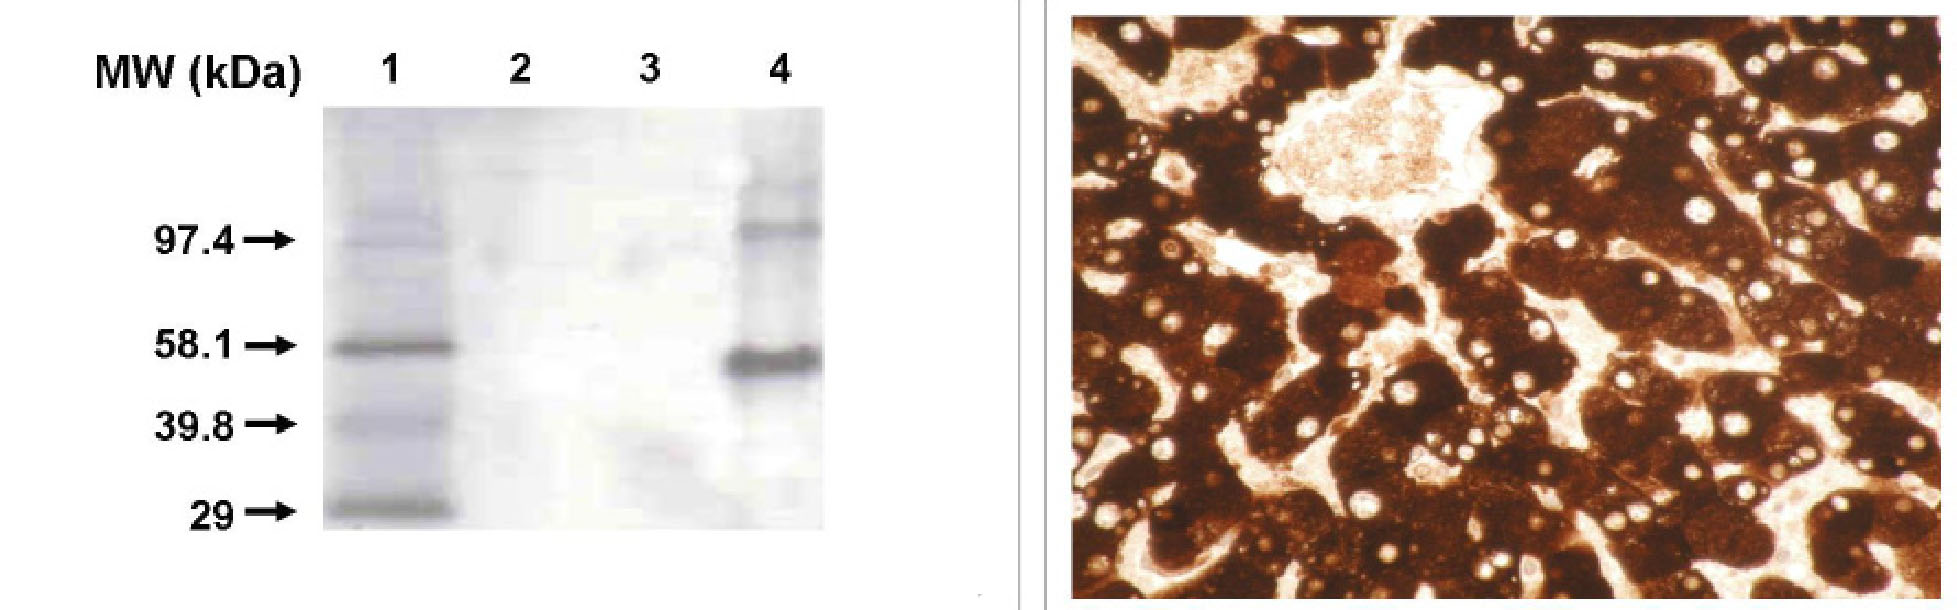 "
Left: Western blot using CYP1A2 antibody (Cat. No. X2046M) on recombinant (2) CYP1B1, (3) CYP1A1 and (4) CYP1A2 (0.5 pmol per lane).
Right: Immunohistochemical staining of formalin-fixed, paraffin-embedded normal human liver tissue section."